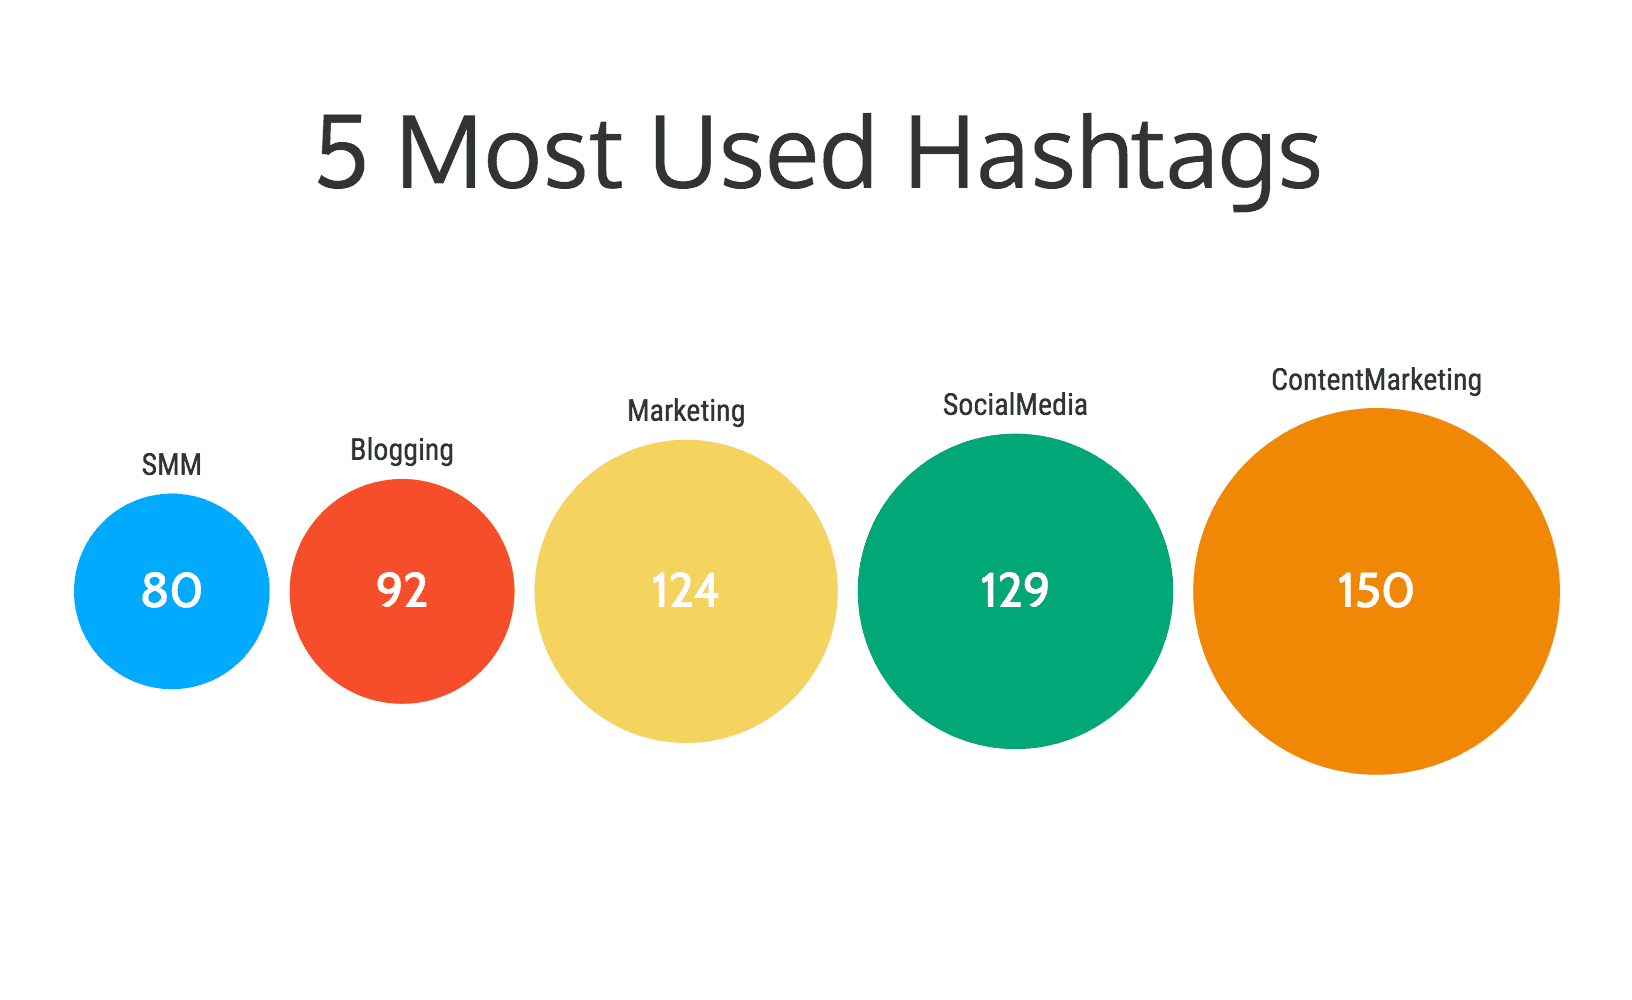 How do thought leaders & influencers use hashtags? Smart Insights